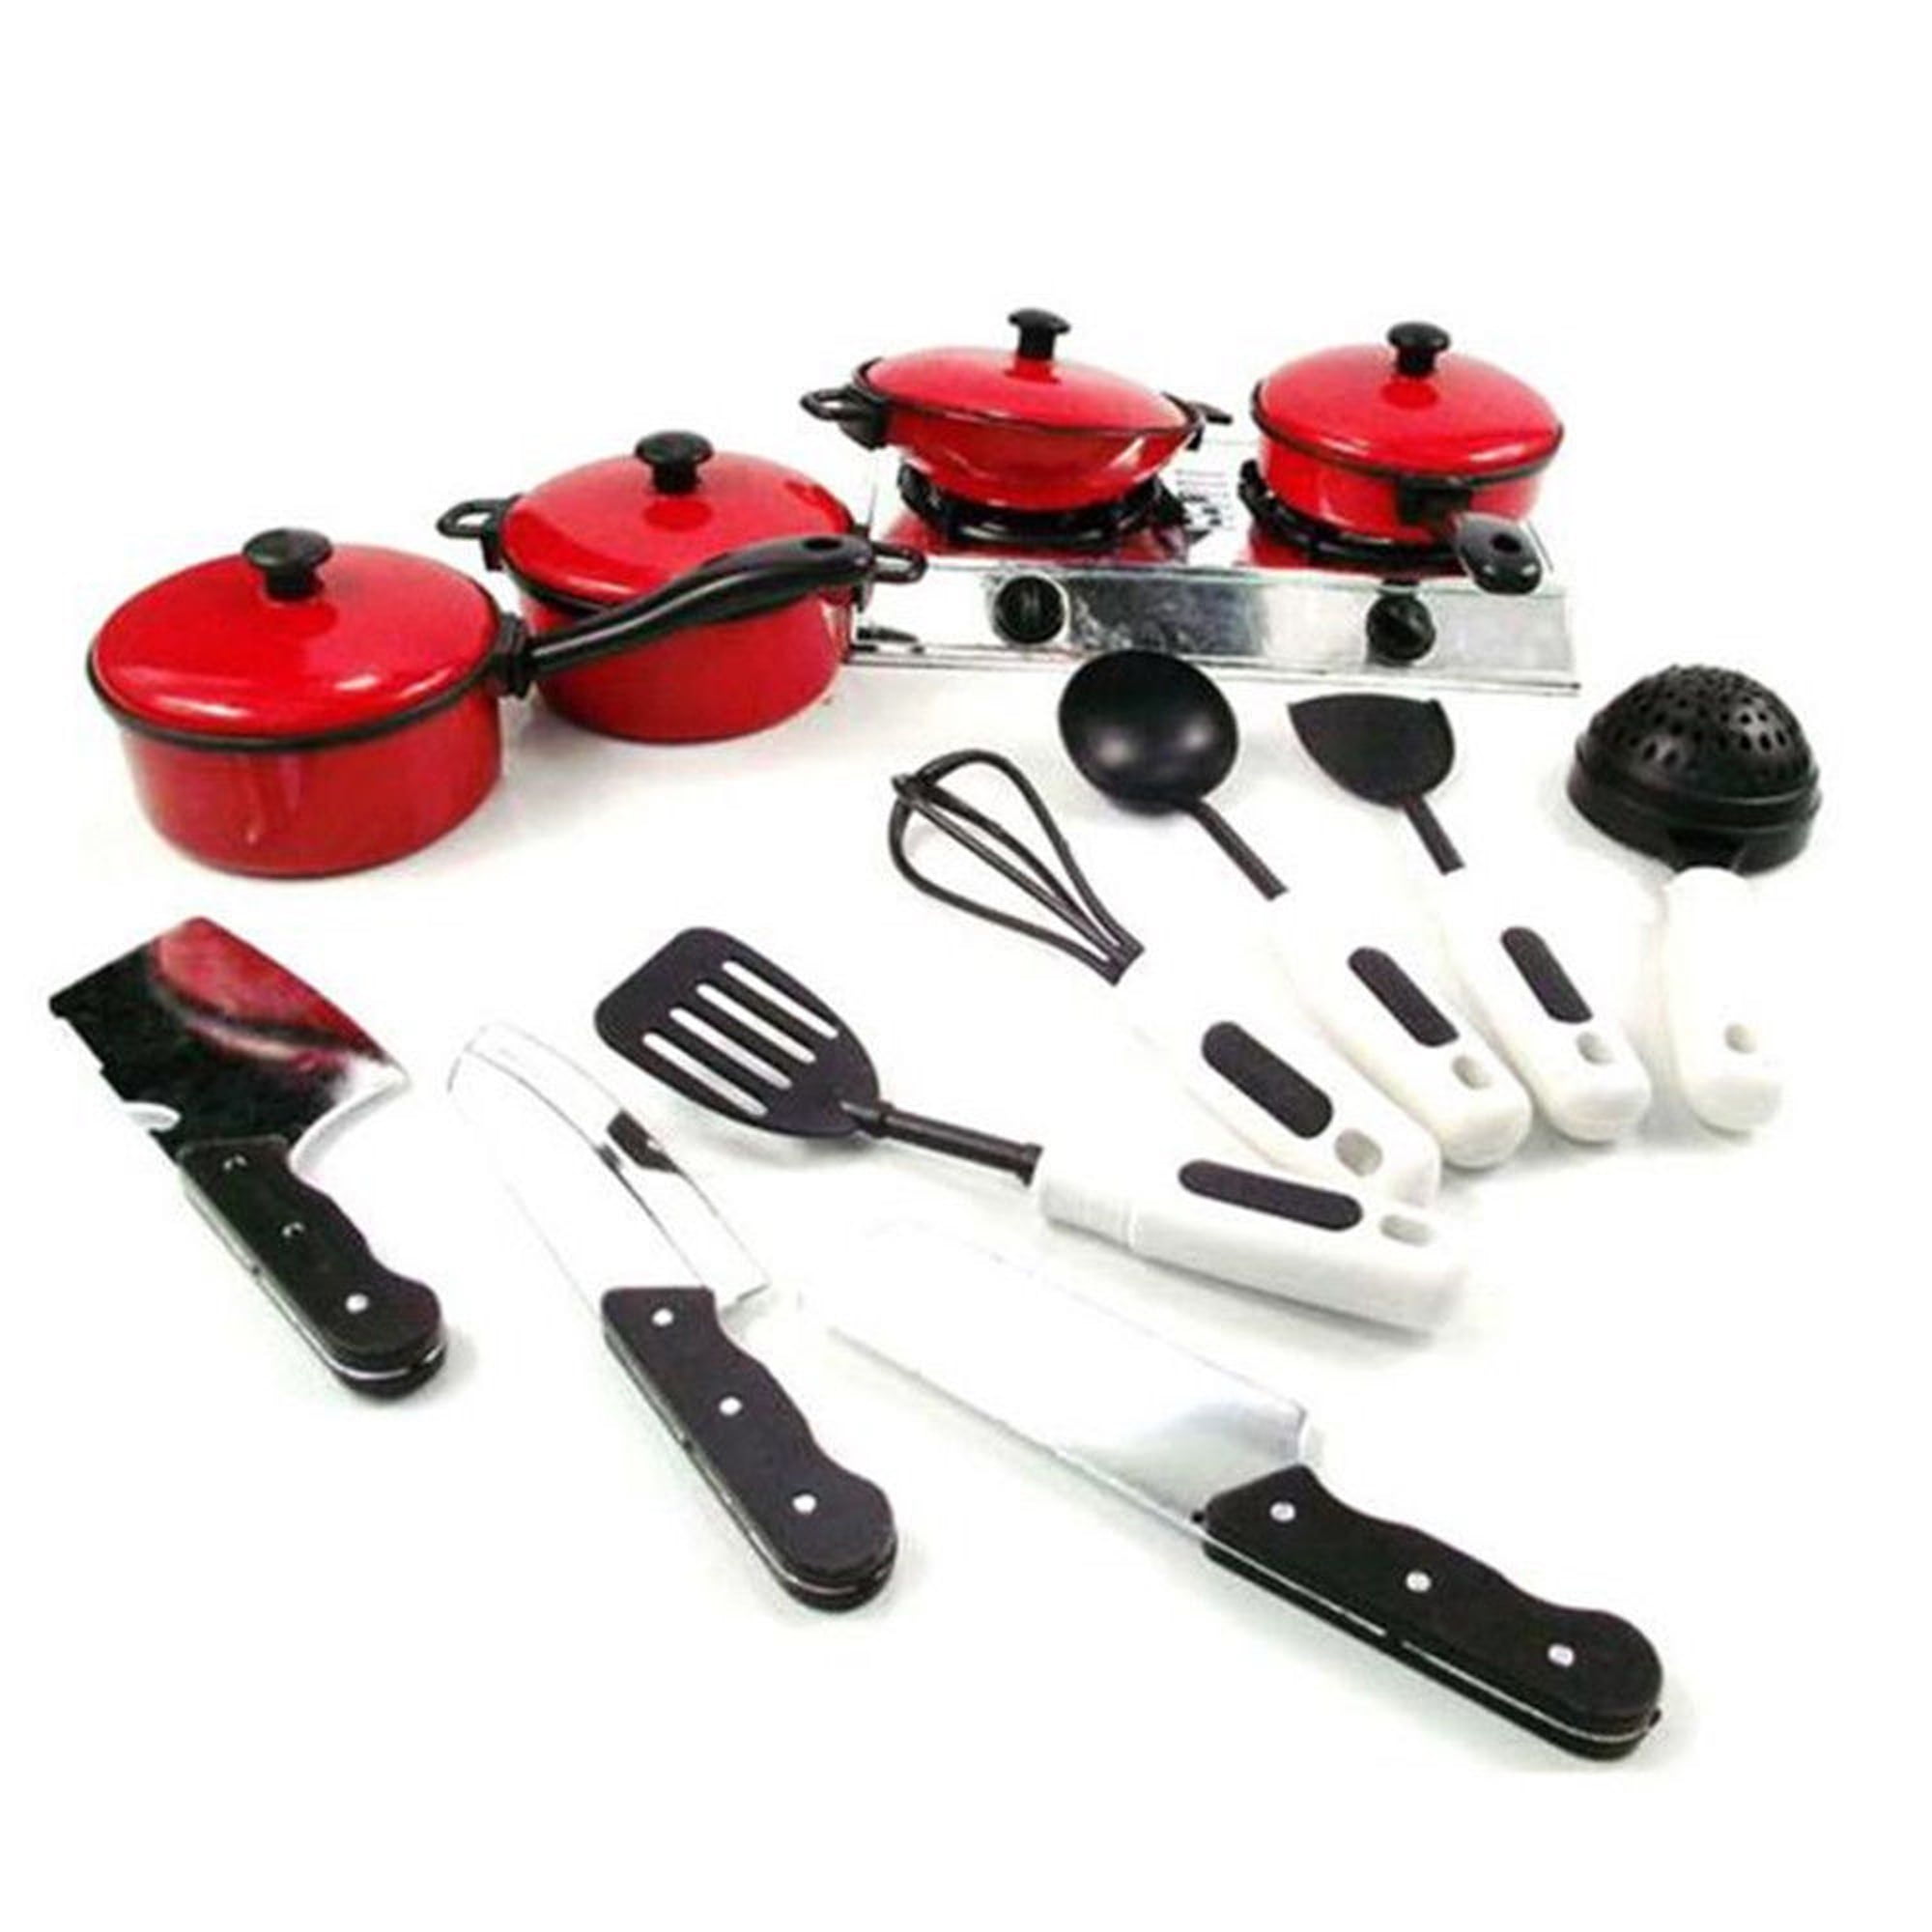 13PCS/Kit Kids Cookware Play House Toys Kitchen Utensils Pot Pans Cooking Dishes 